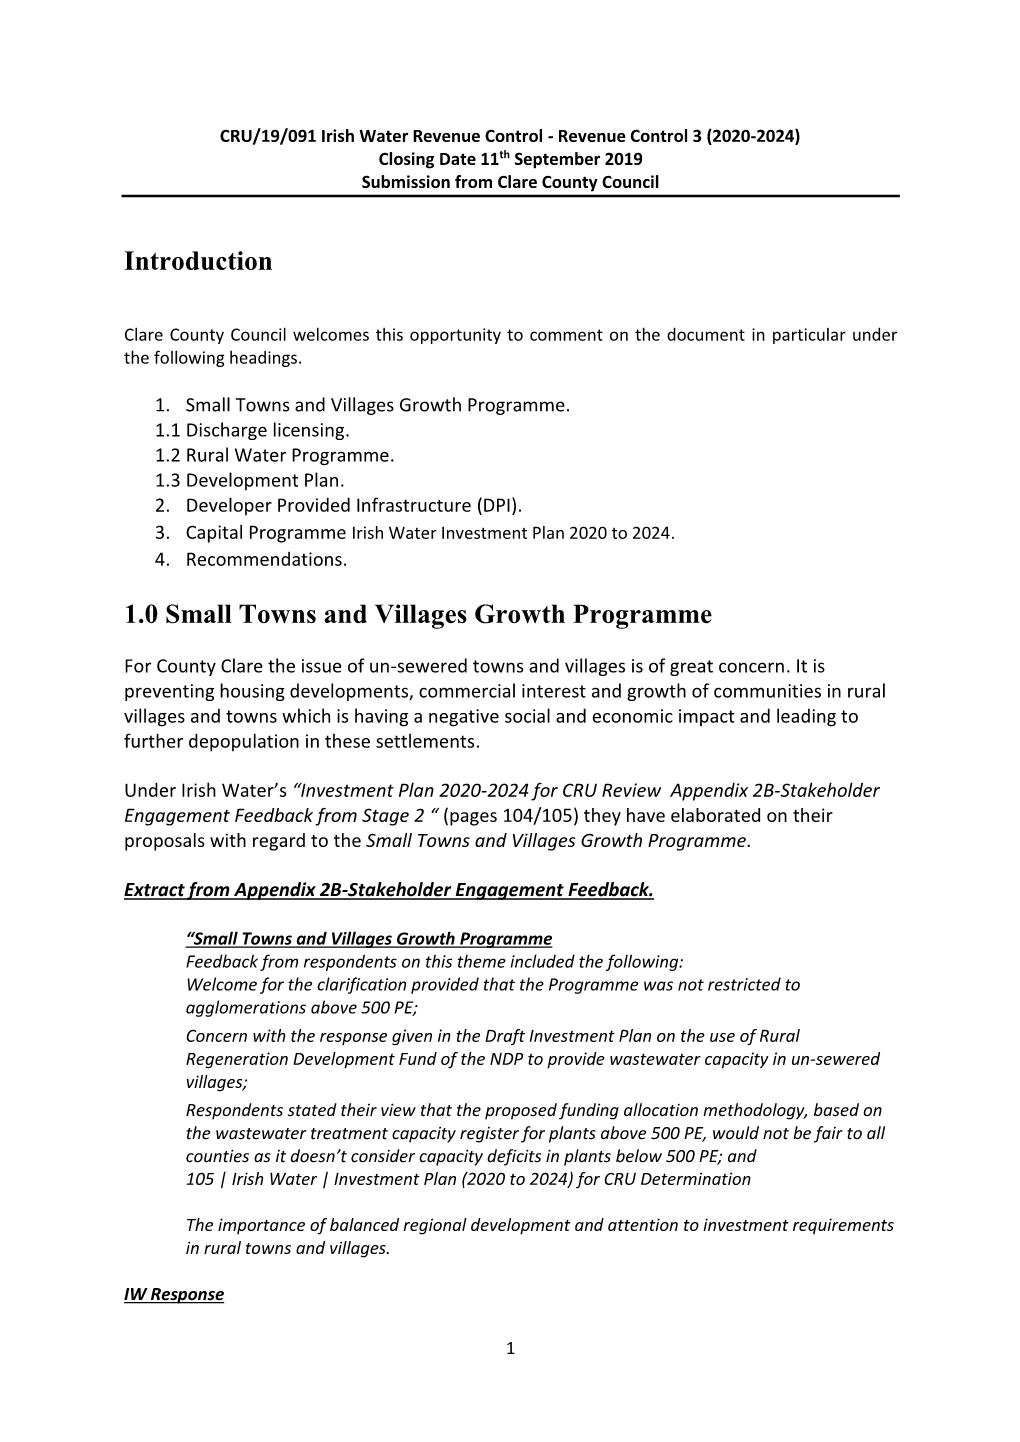 Introduction 1.0 Small Towns and Villages Growth Programme